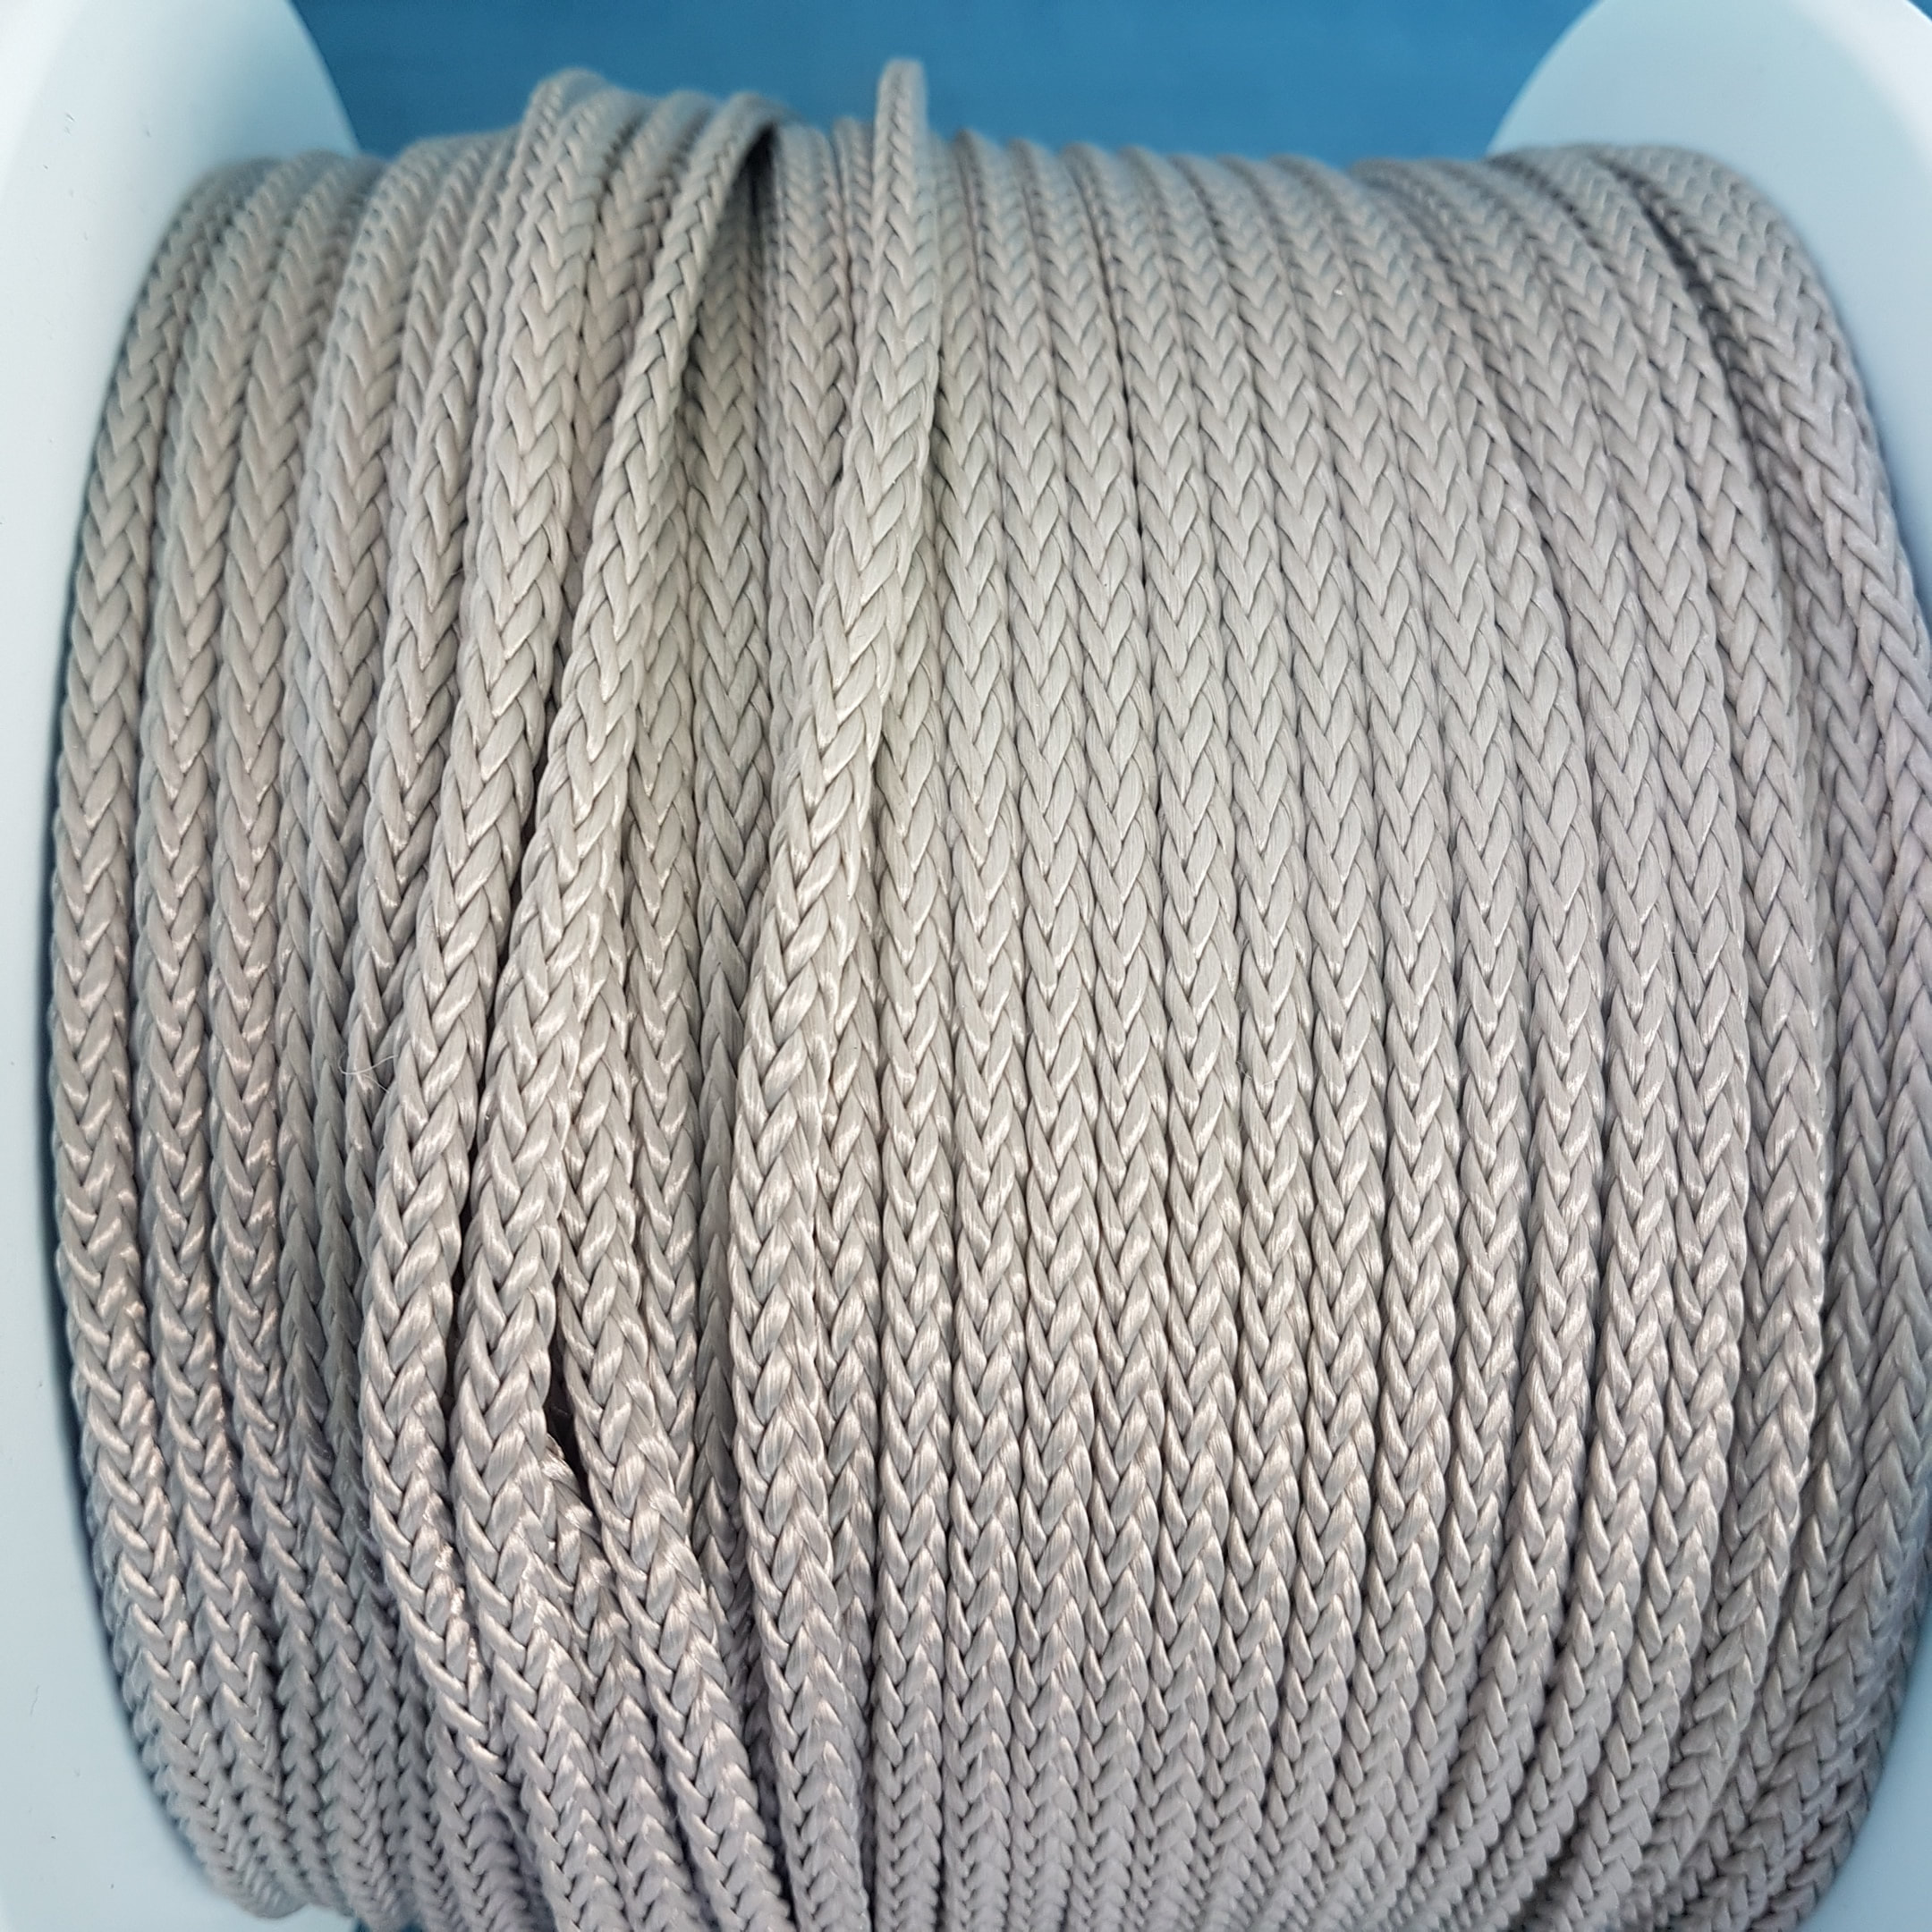 halyard rope for sailboat